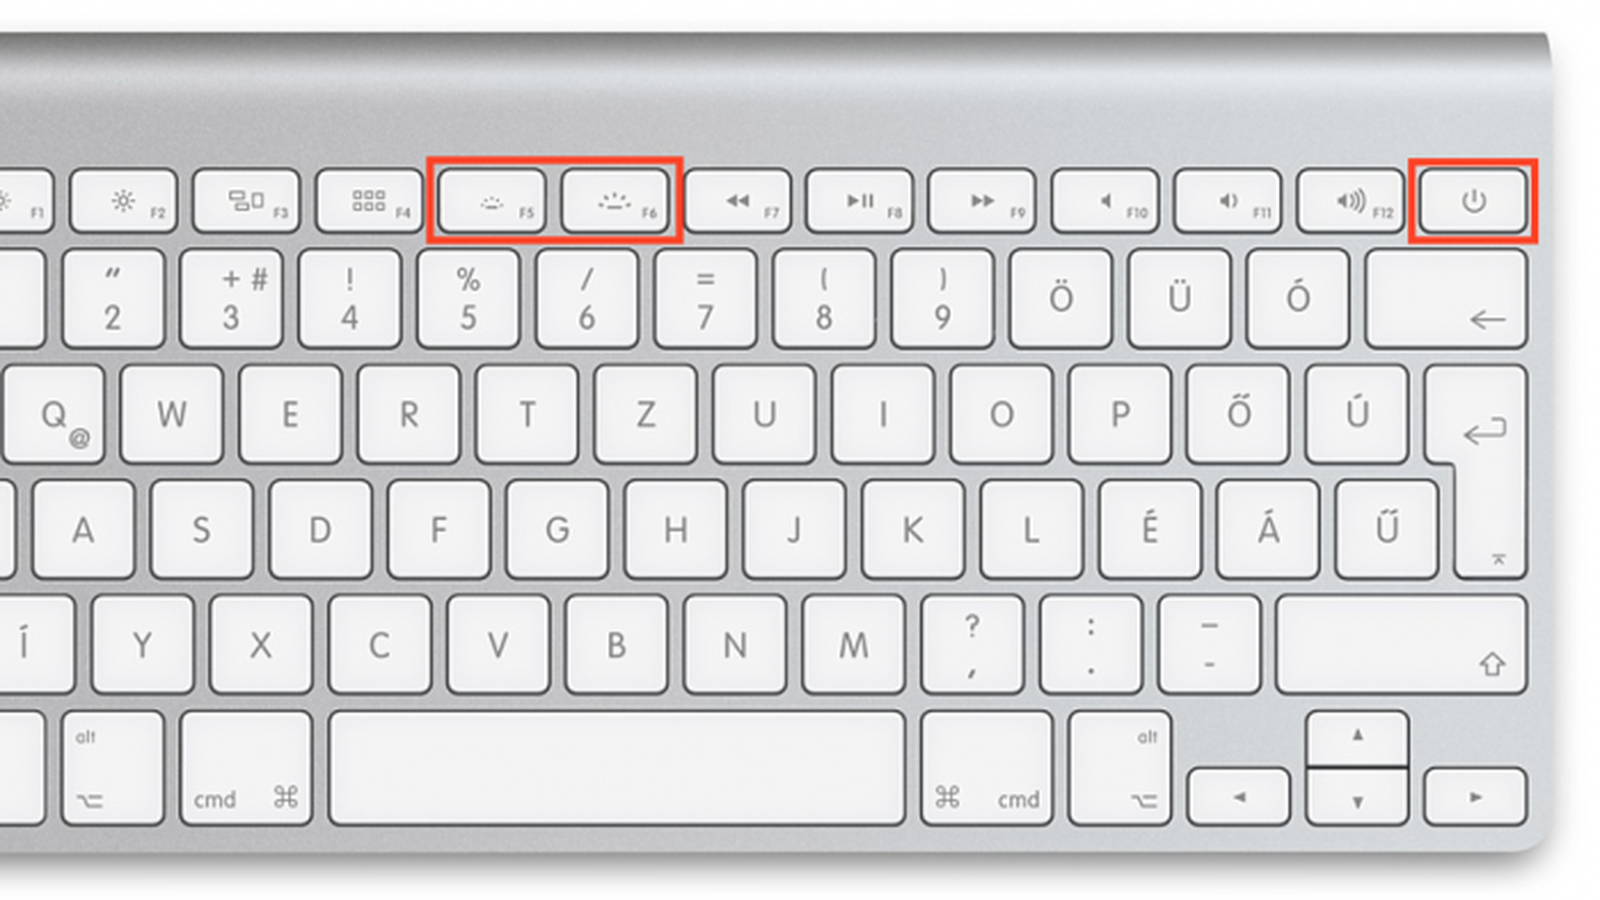 excitation Oar Thigh Images of Apple Wireless Keyboard With Backlight Keys and Power Button  Appear in Online Store [Updated] - MacRumors